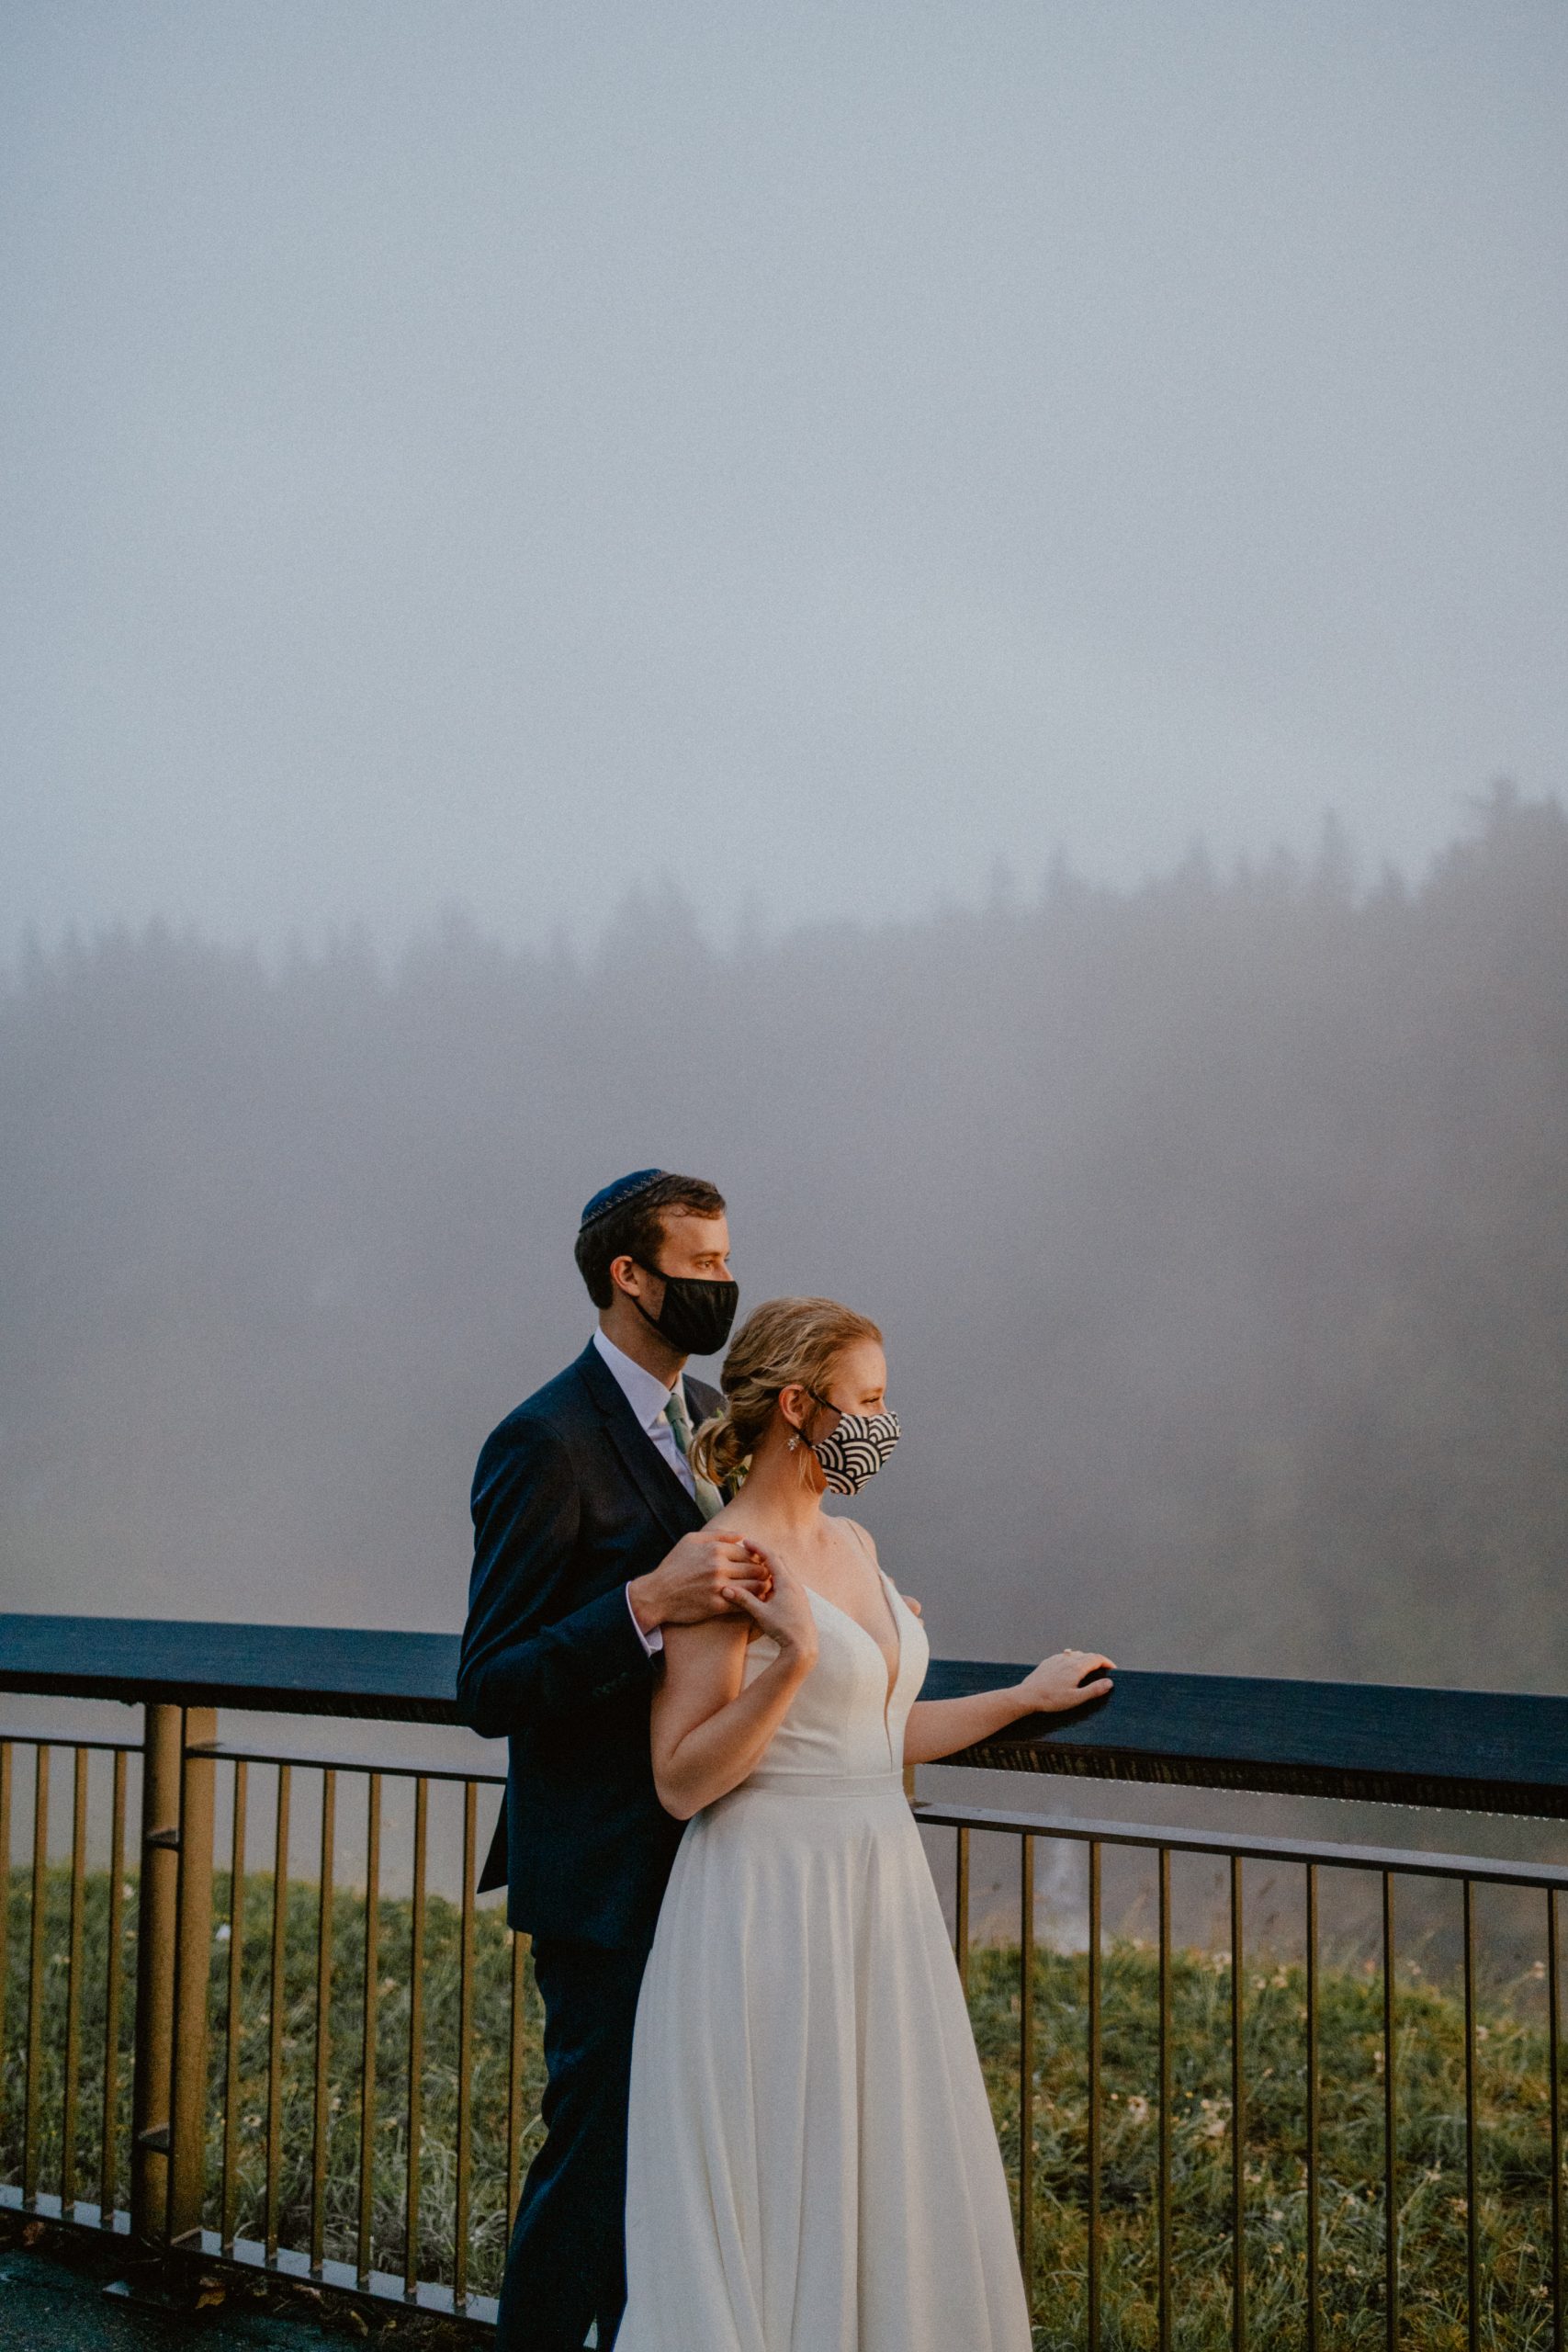 Bride and Groom in masks look out over the PNW wilderness | Seattle Elopement, Washington Elopement Photographer, Washington Elopement and Wedding Inspiration, Seattle Elopement ideas, PNW Wedding Inspiration, Fall Rainy PNW Wedding Ideas, Fall Wedding Inspiration, PNW Outdoor Wedding Ideas | chelseaabril.com